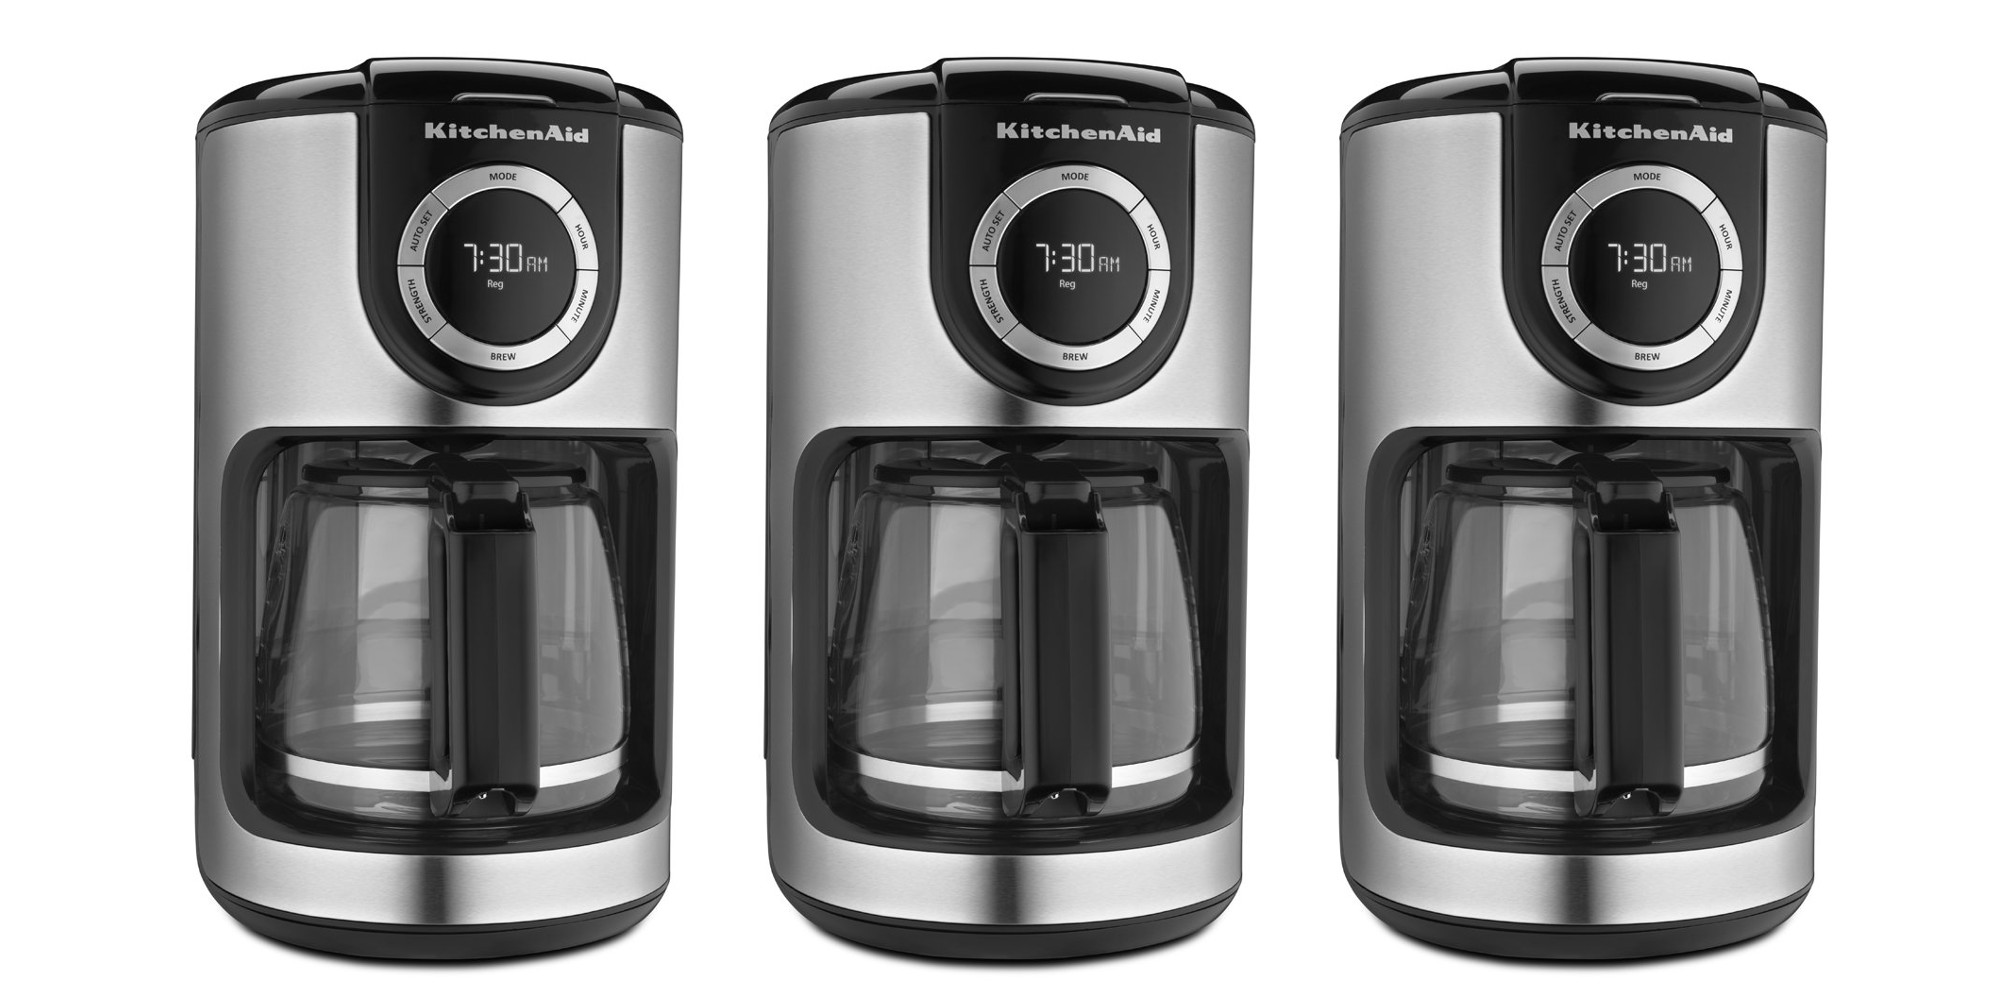 https://9to5toys.com/wp-content/uploads/sites/5/2019/09/KitchenAid-12-Cup-Glass-Carafe-Coffee-Maker-in-Onyx-Black-KCM1202OB.jpg